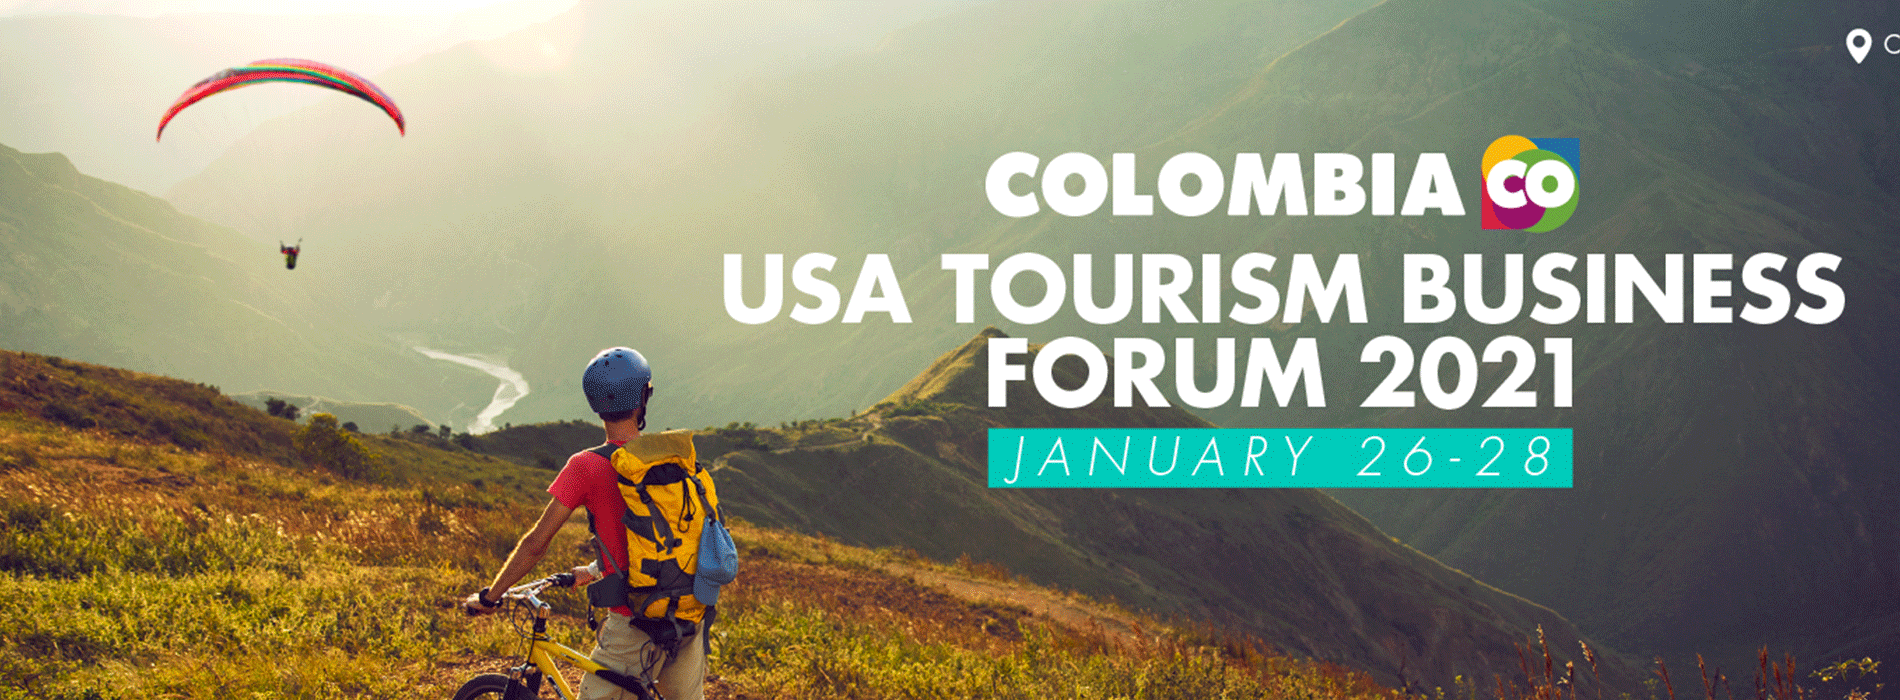 ProColombia Hosts the Colombia USA Tourism Business Forum